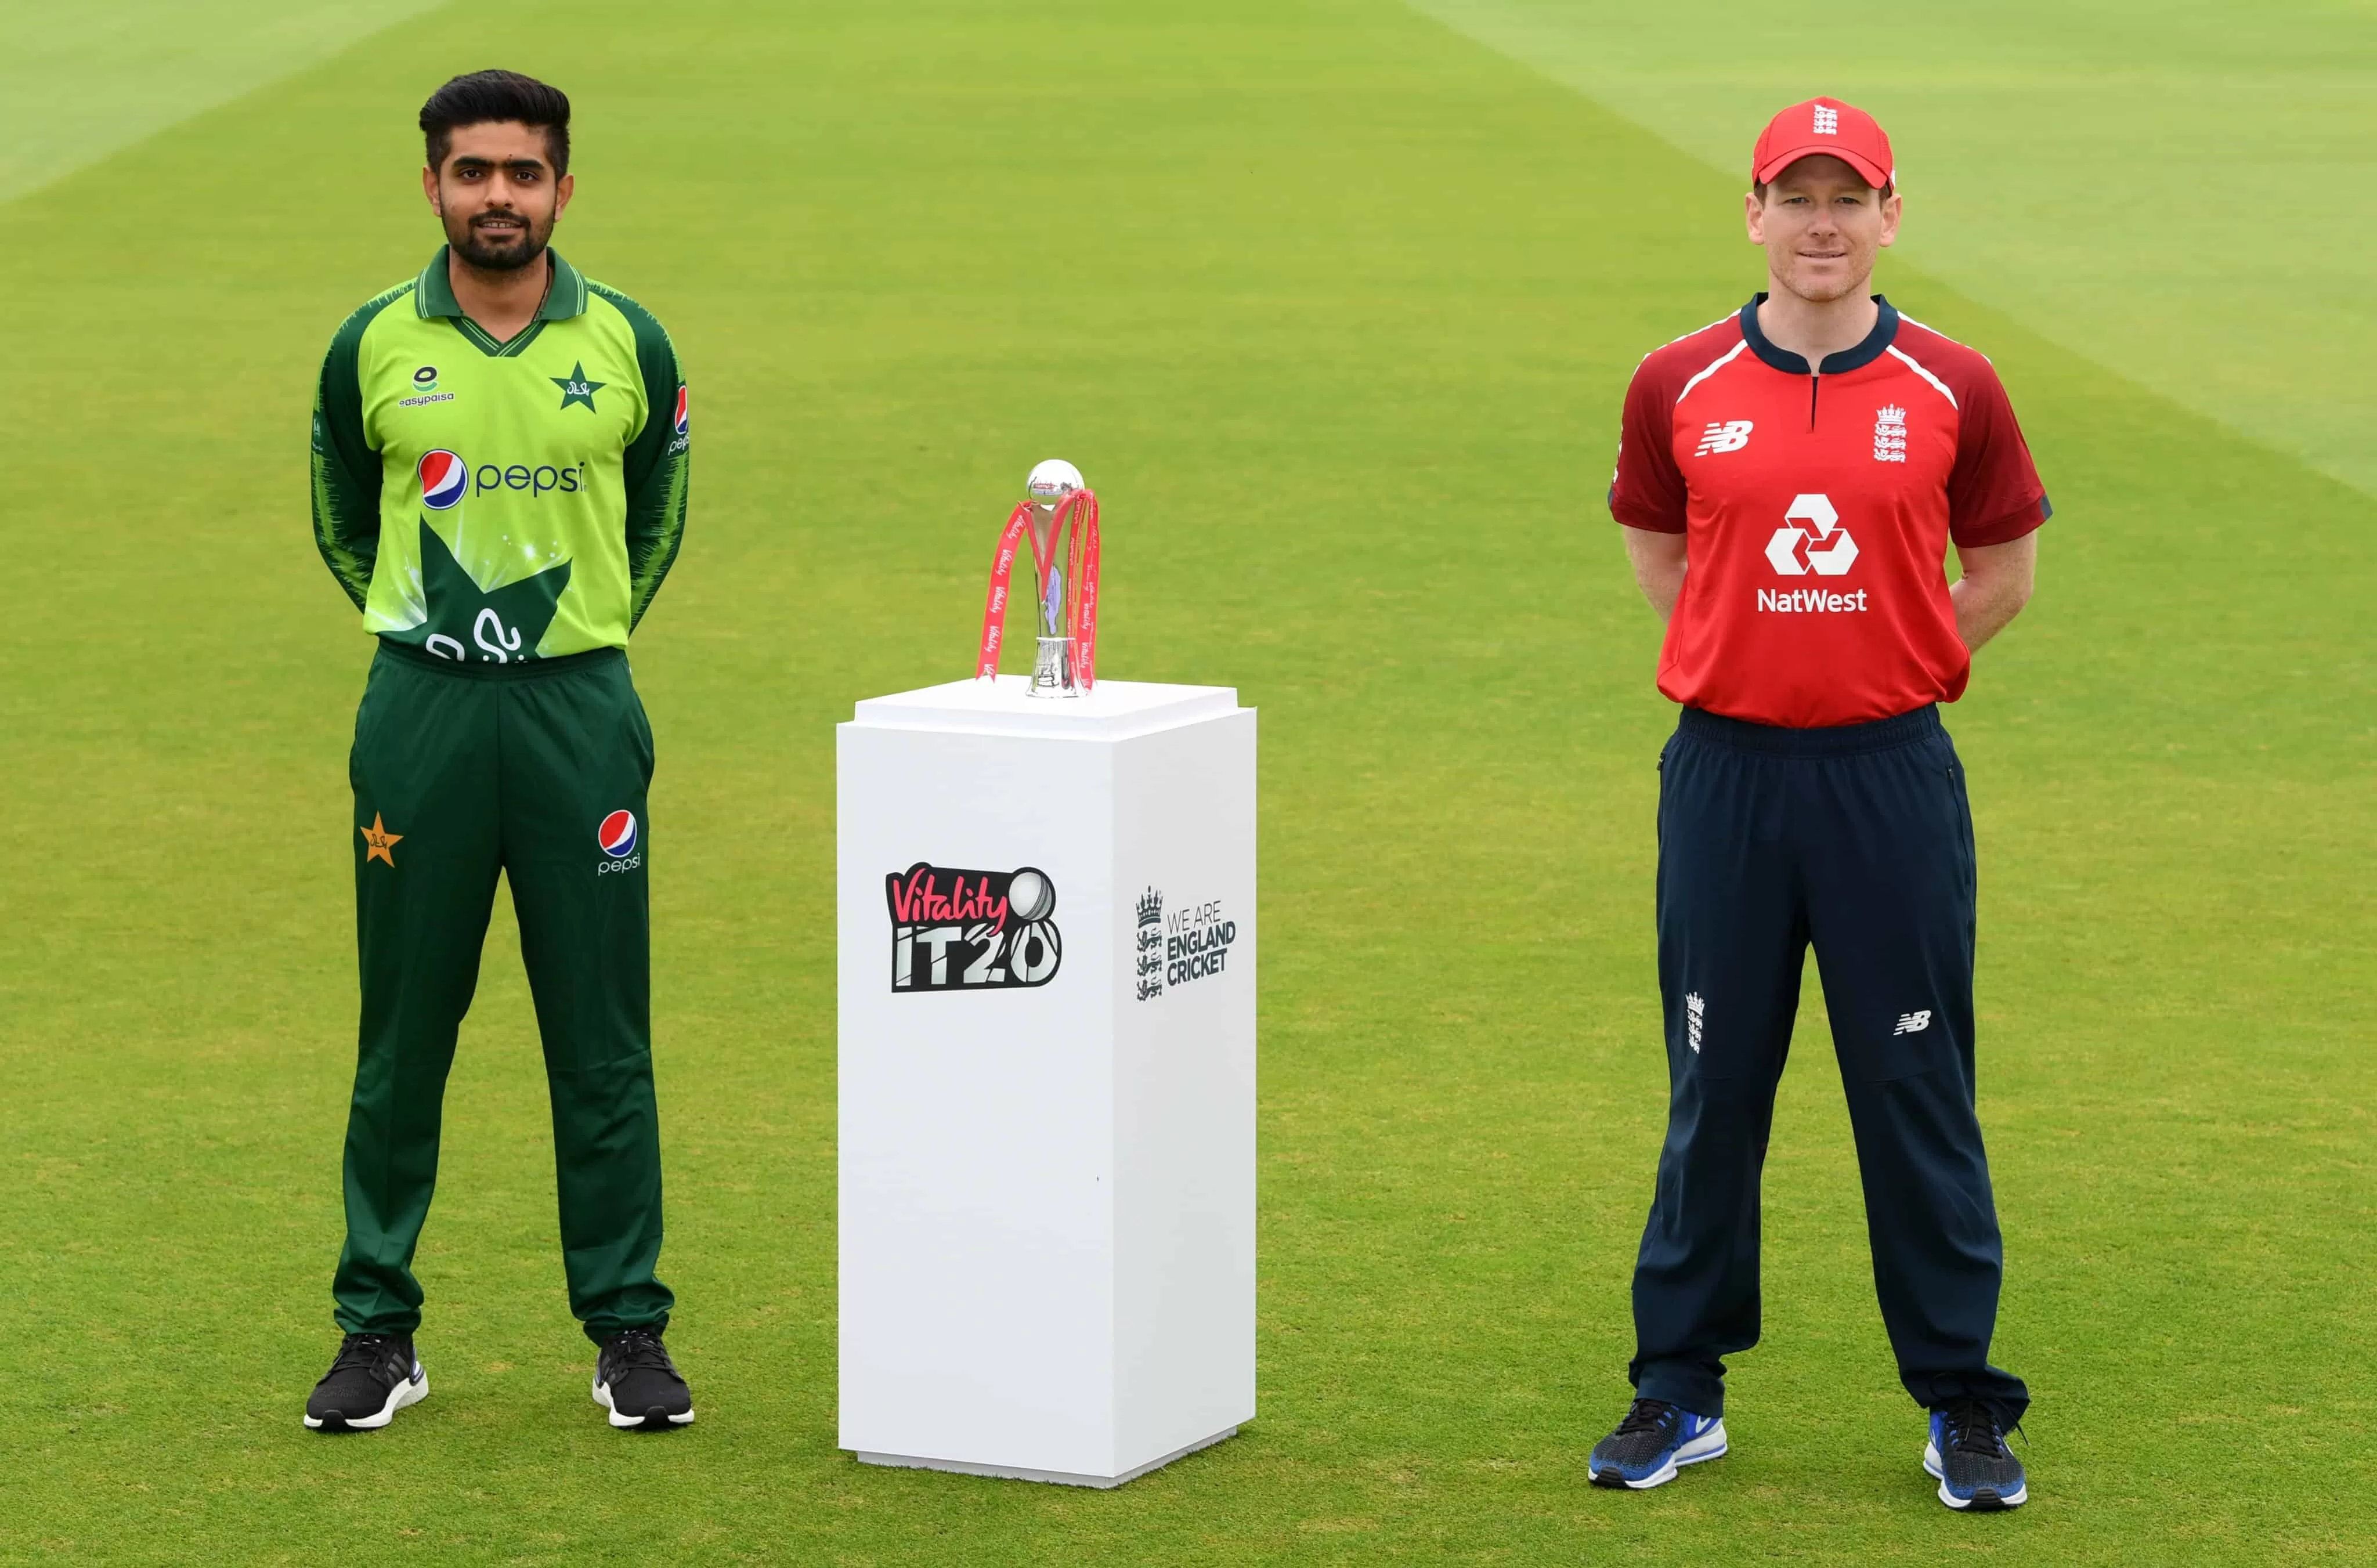 England was to tour Pakistan in October to play 2 T20Is| AFP